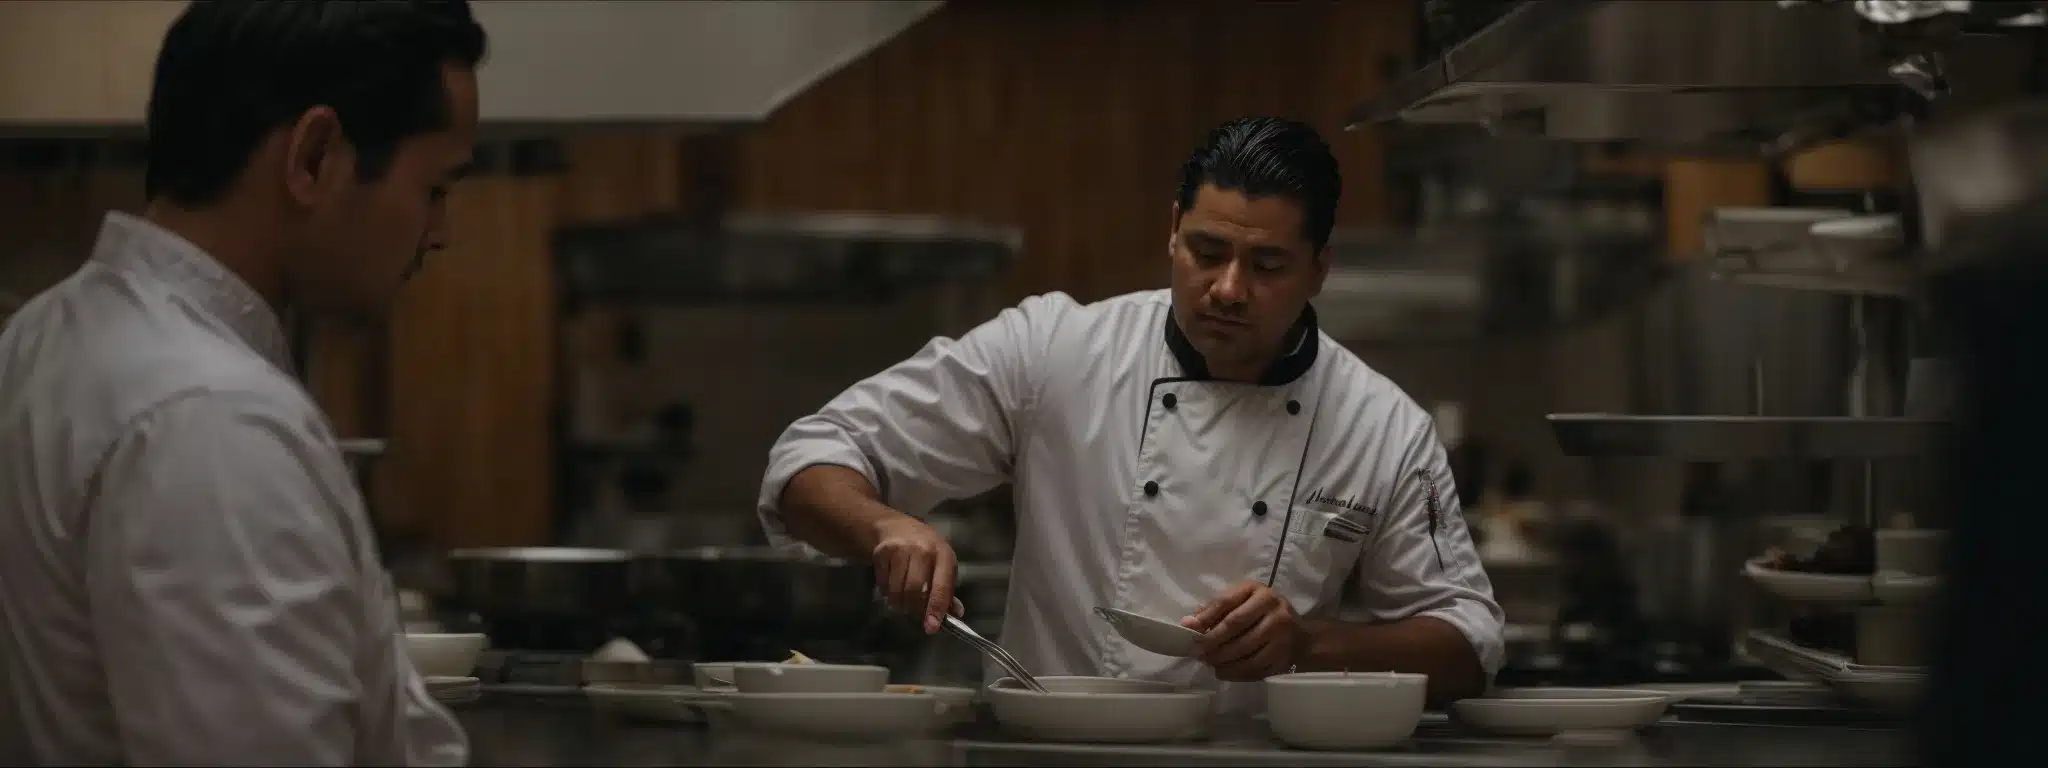 A Chef Scrutinizing A Dish With A Discerning Eye In A Professional Kitchen.